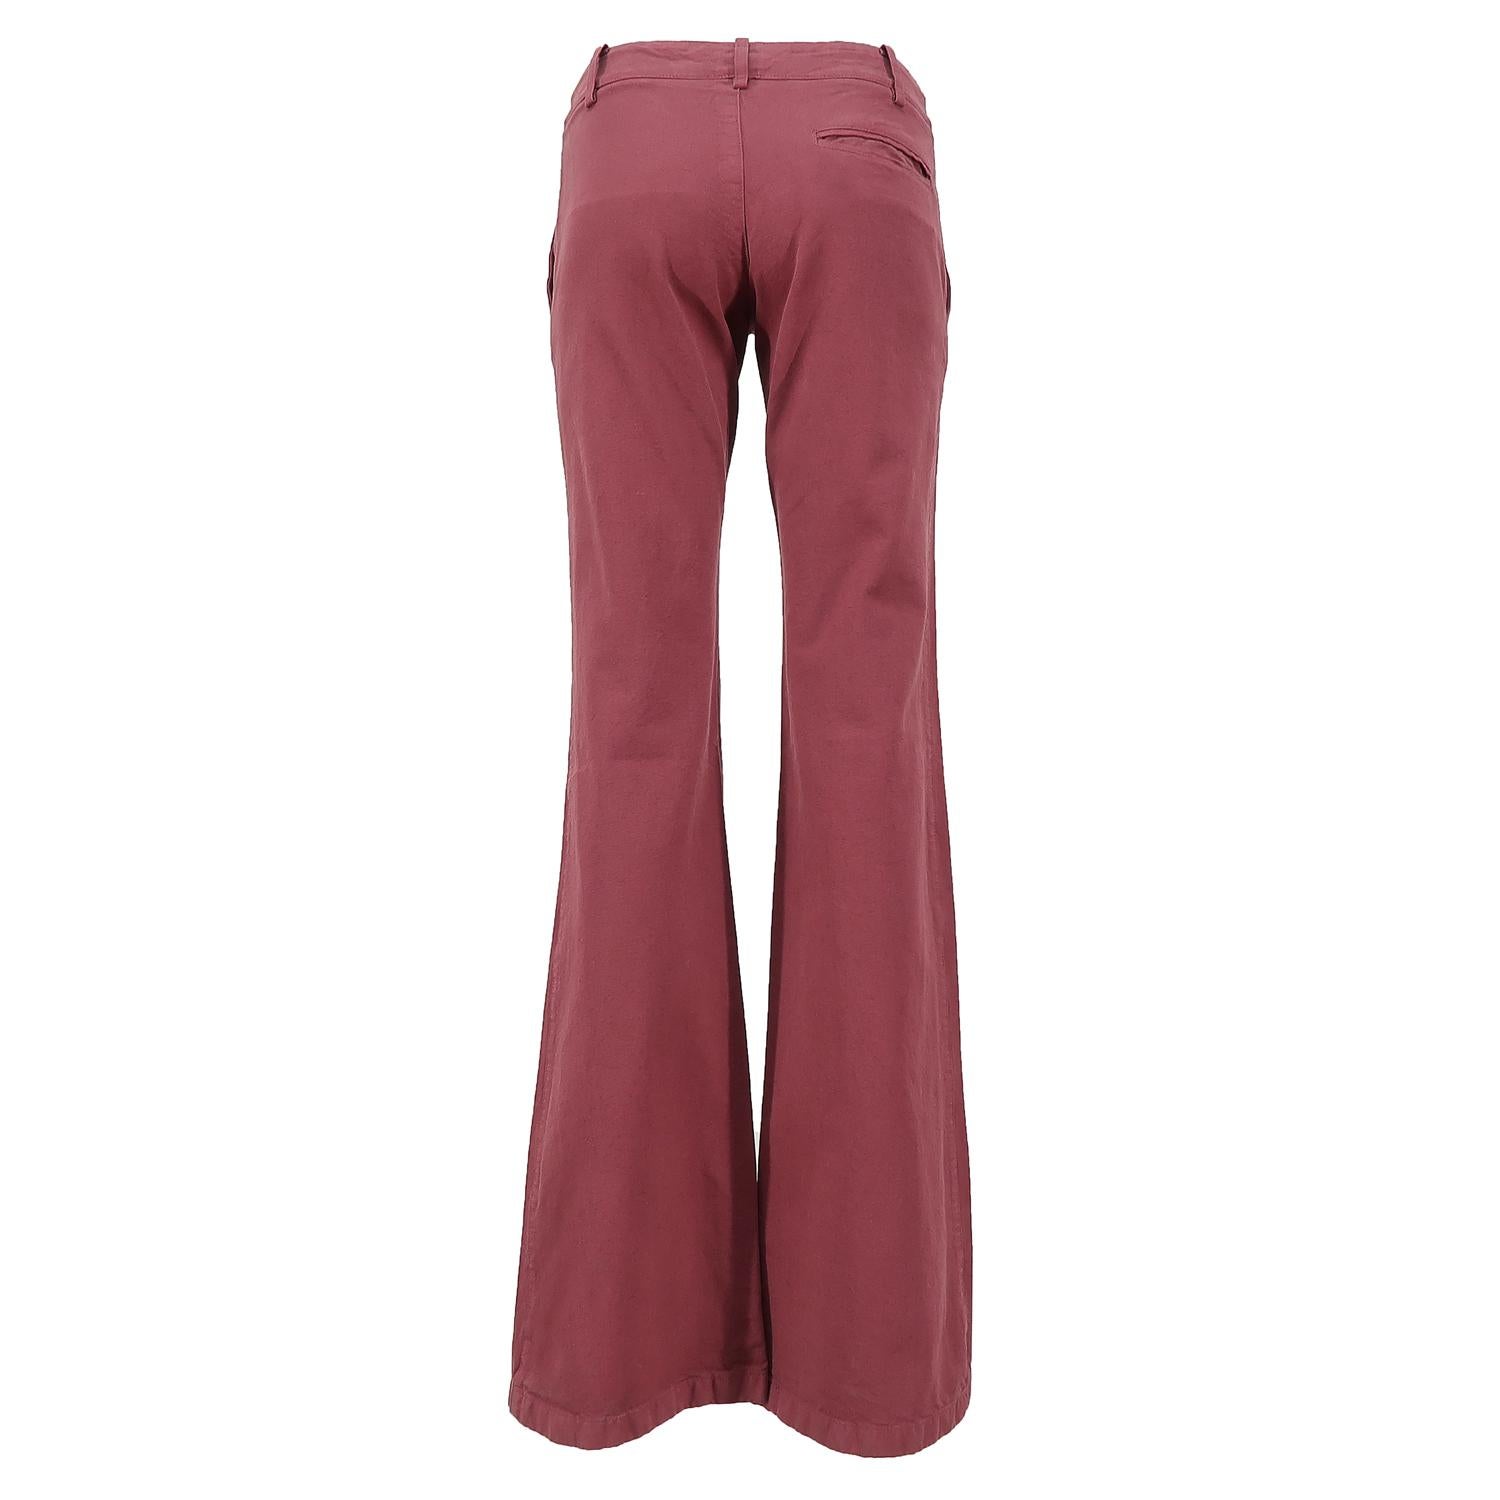 Marni by Consuelo Castiglioni SS-2003 Cotton Low-Waist Bootcut Pants In Excellent Condition In Brussels, BE